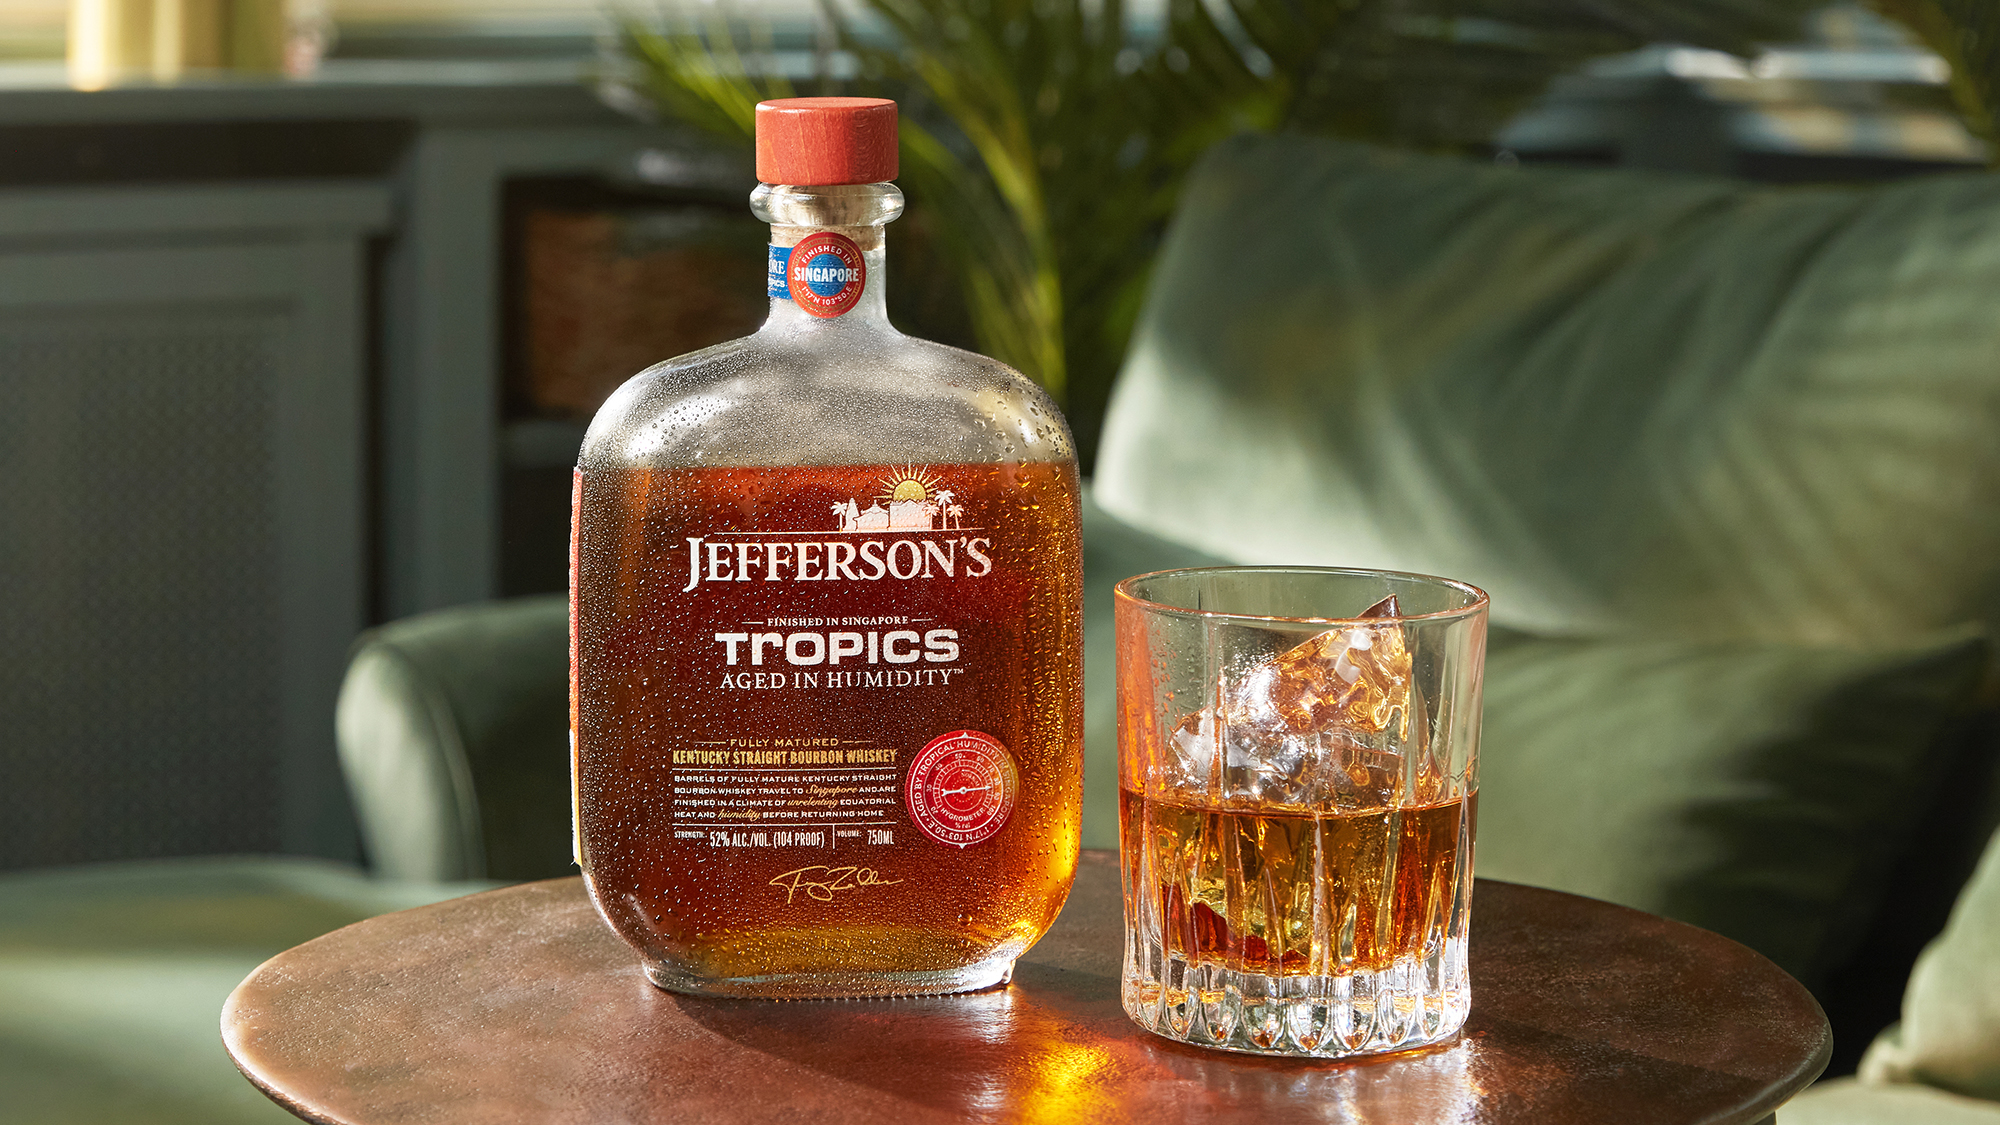 Jefferson’s Tropics Aged in Humidity Bourbon Matured In The Singapore Heat